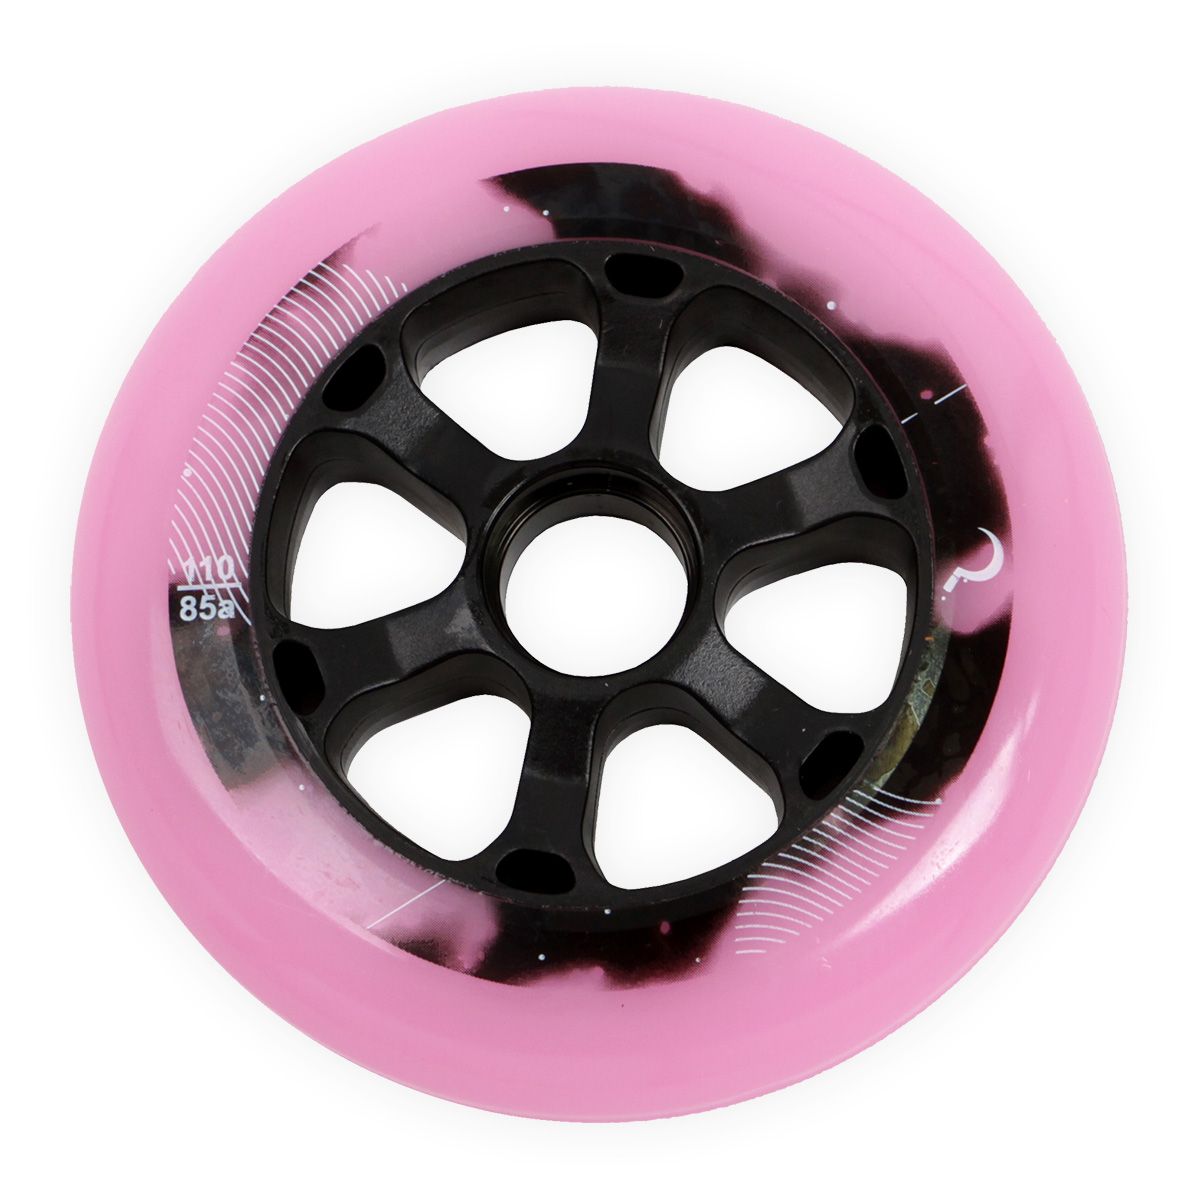 Moon Wheels 110mm 85A - Pink of 6)